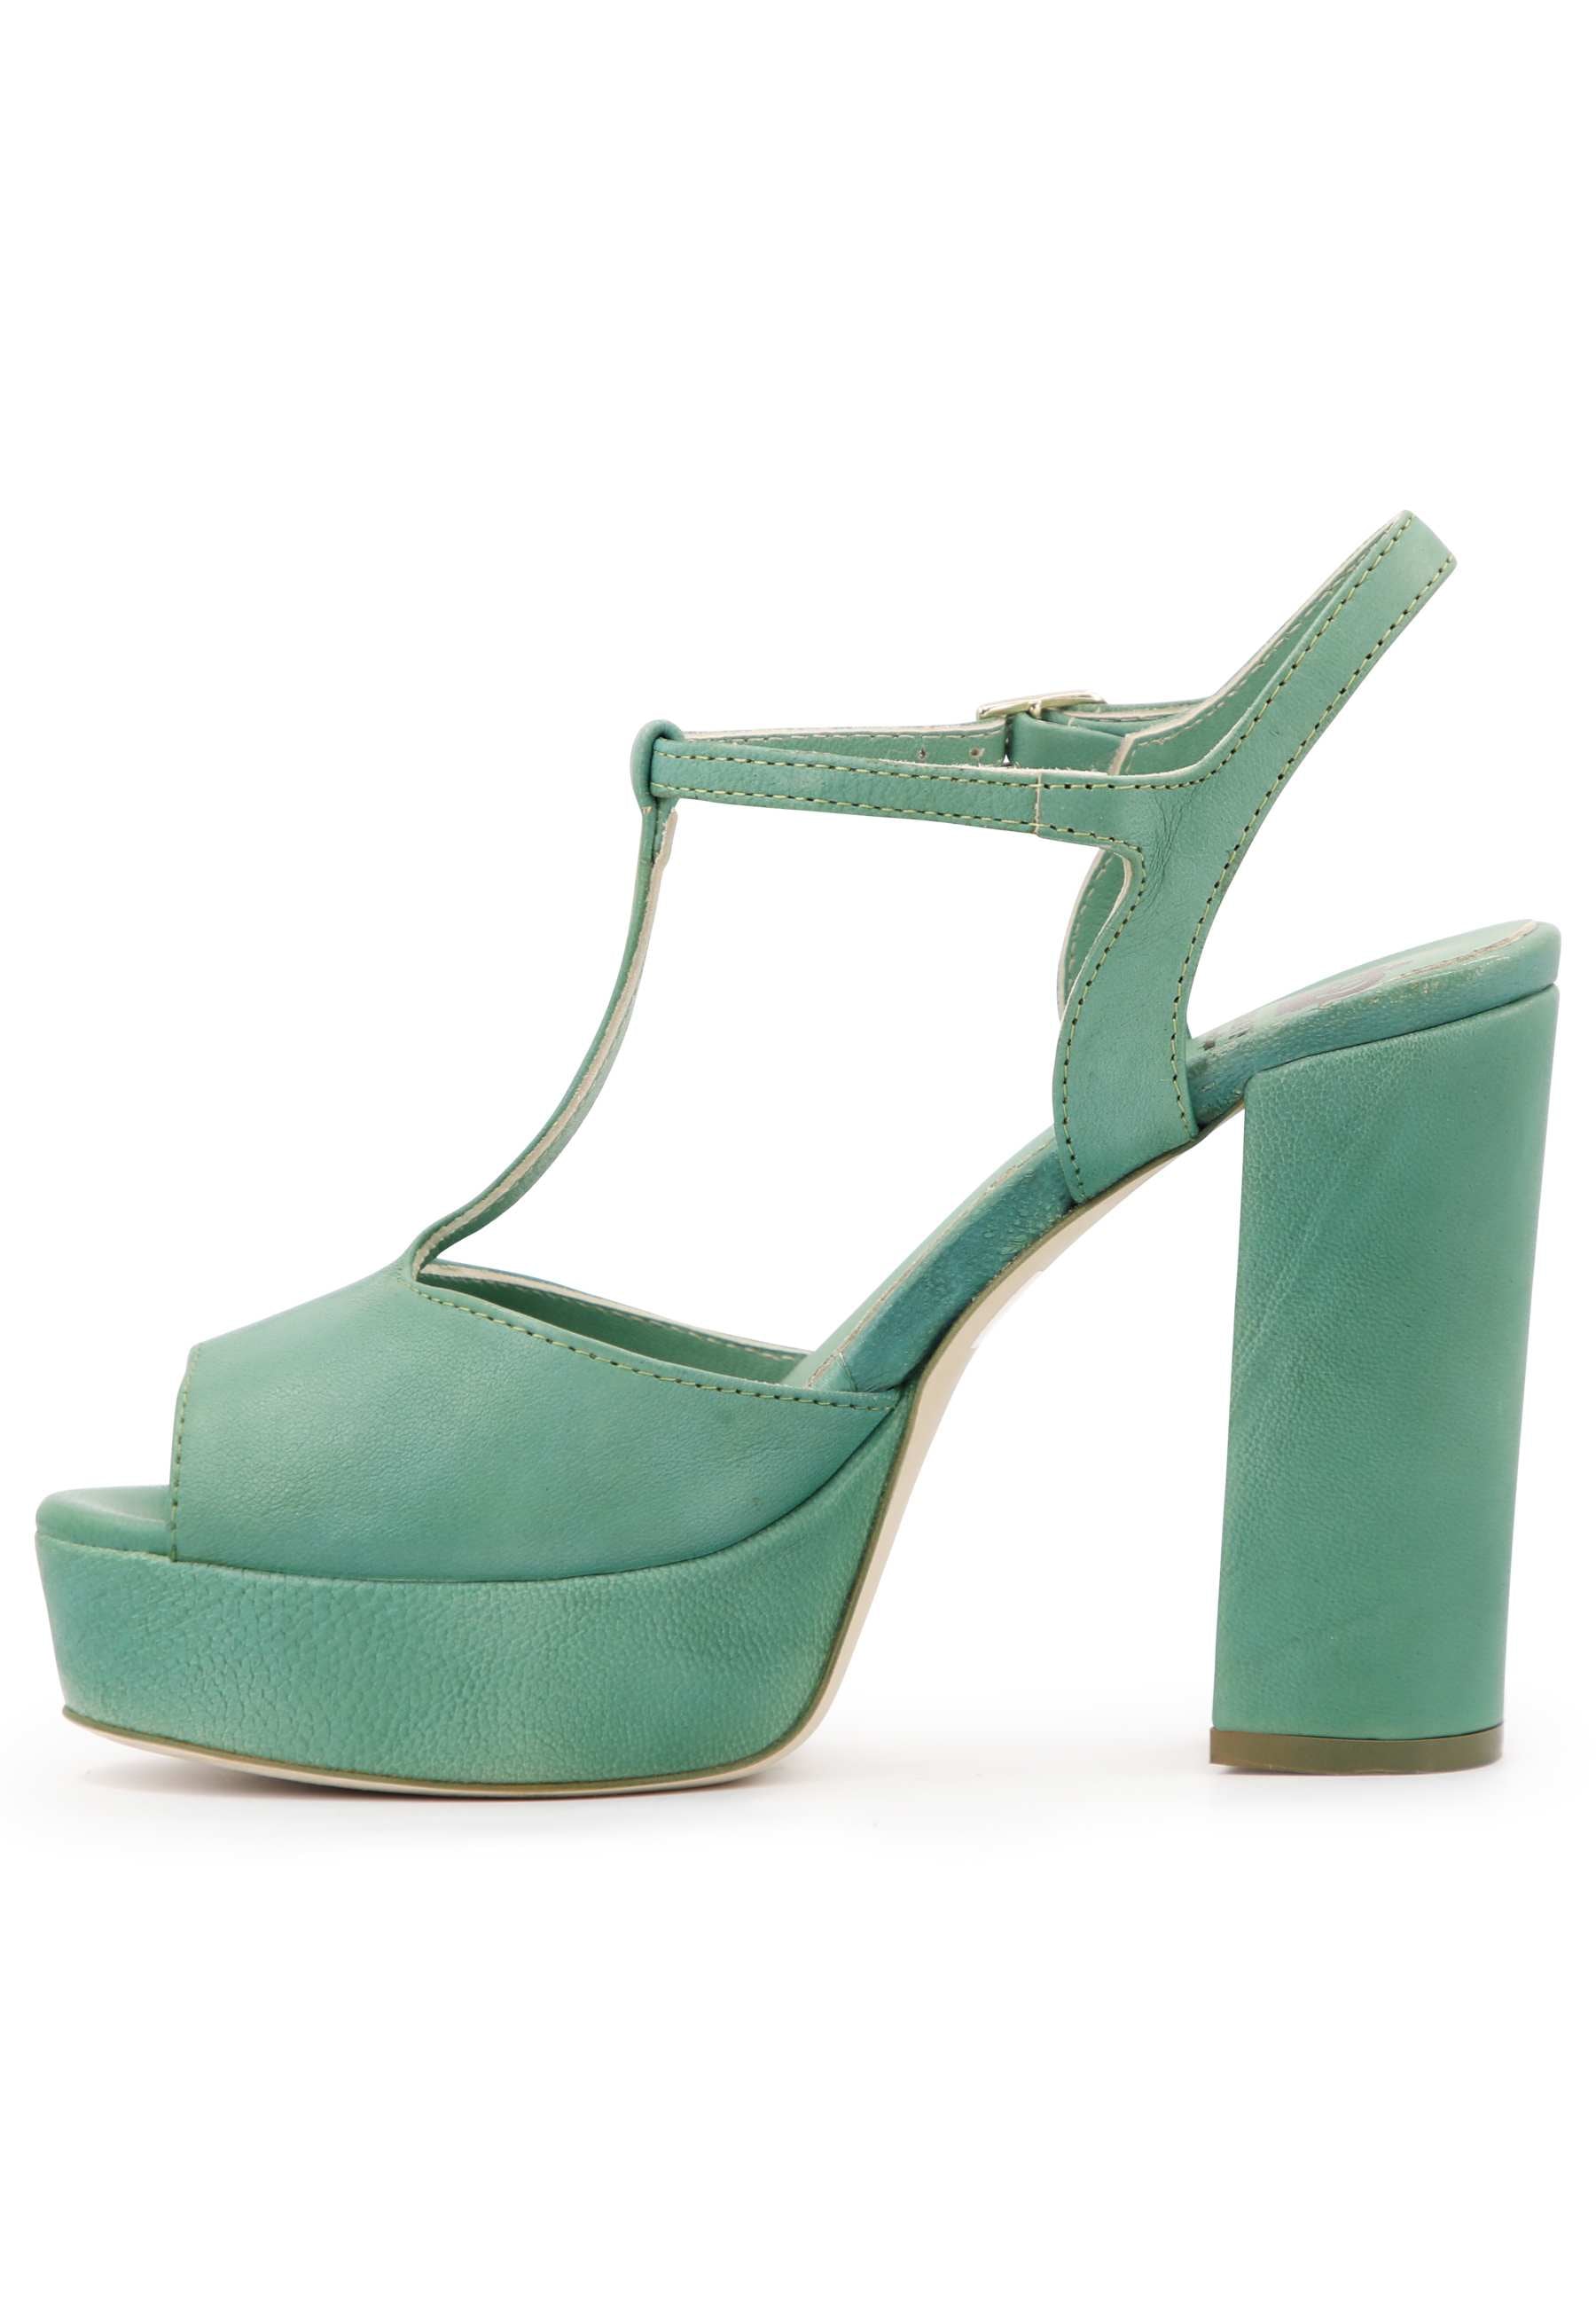 Women's green leather sandals with high heel strap and platform